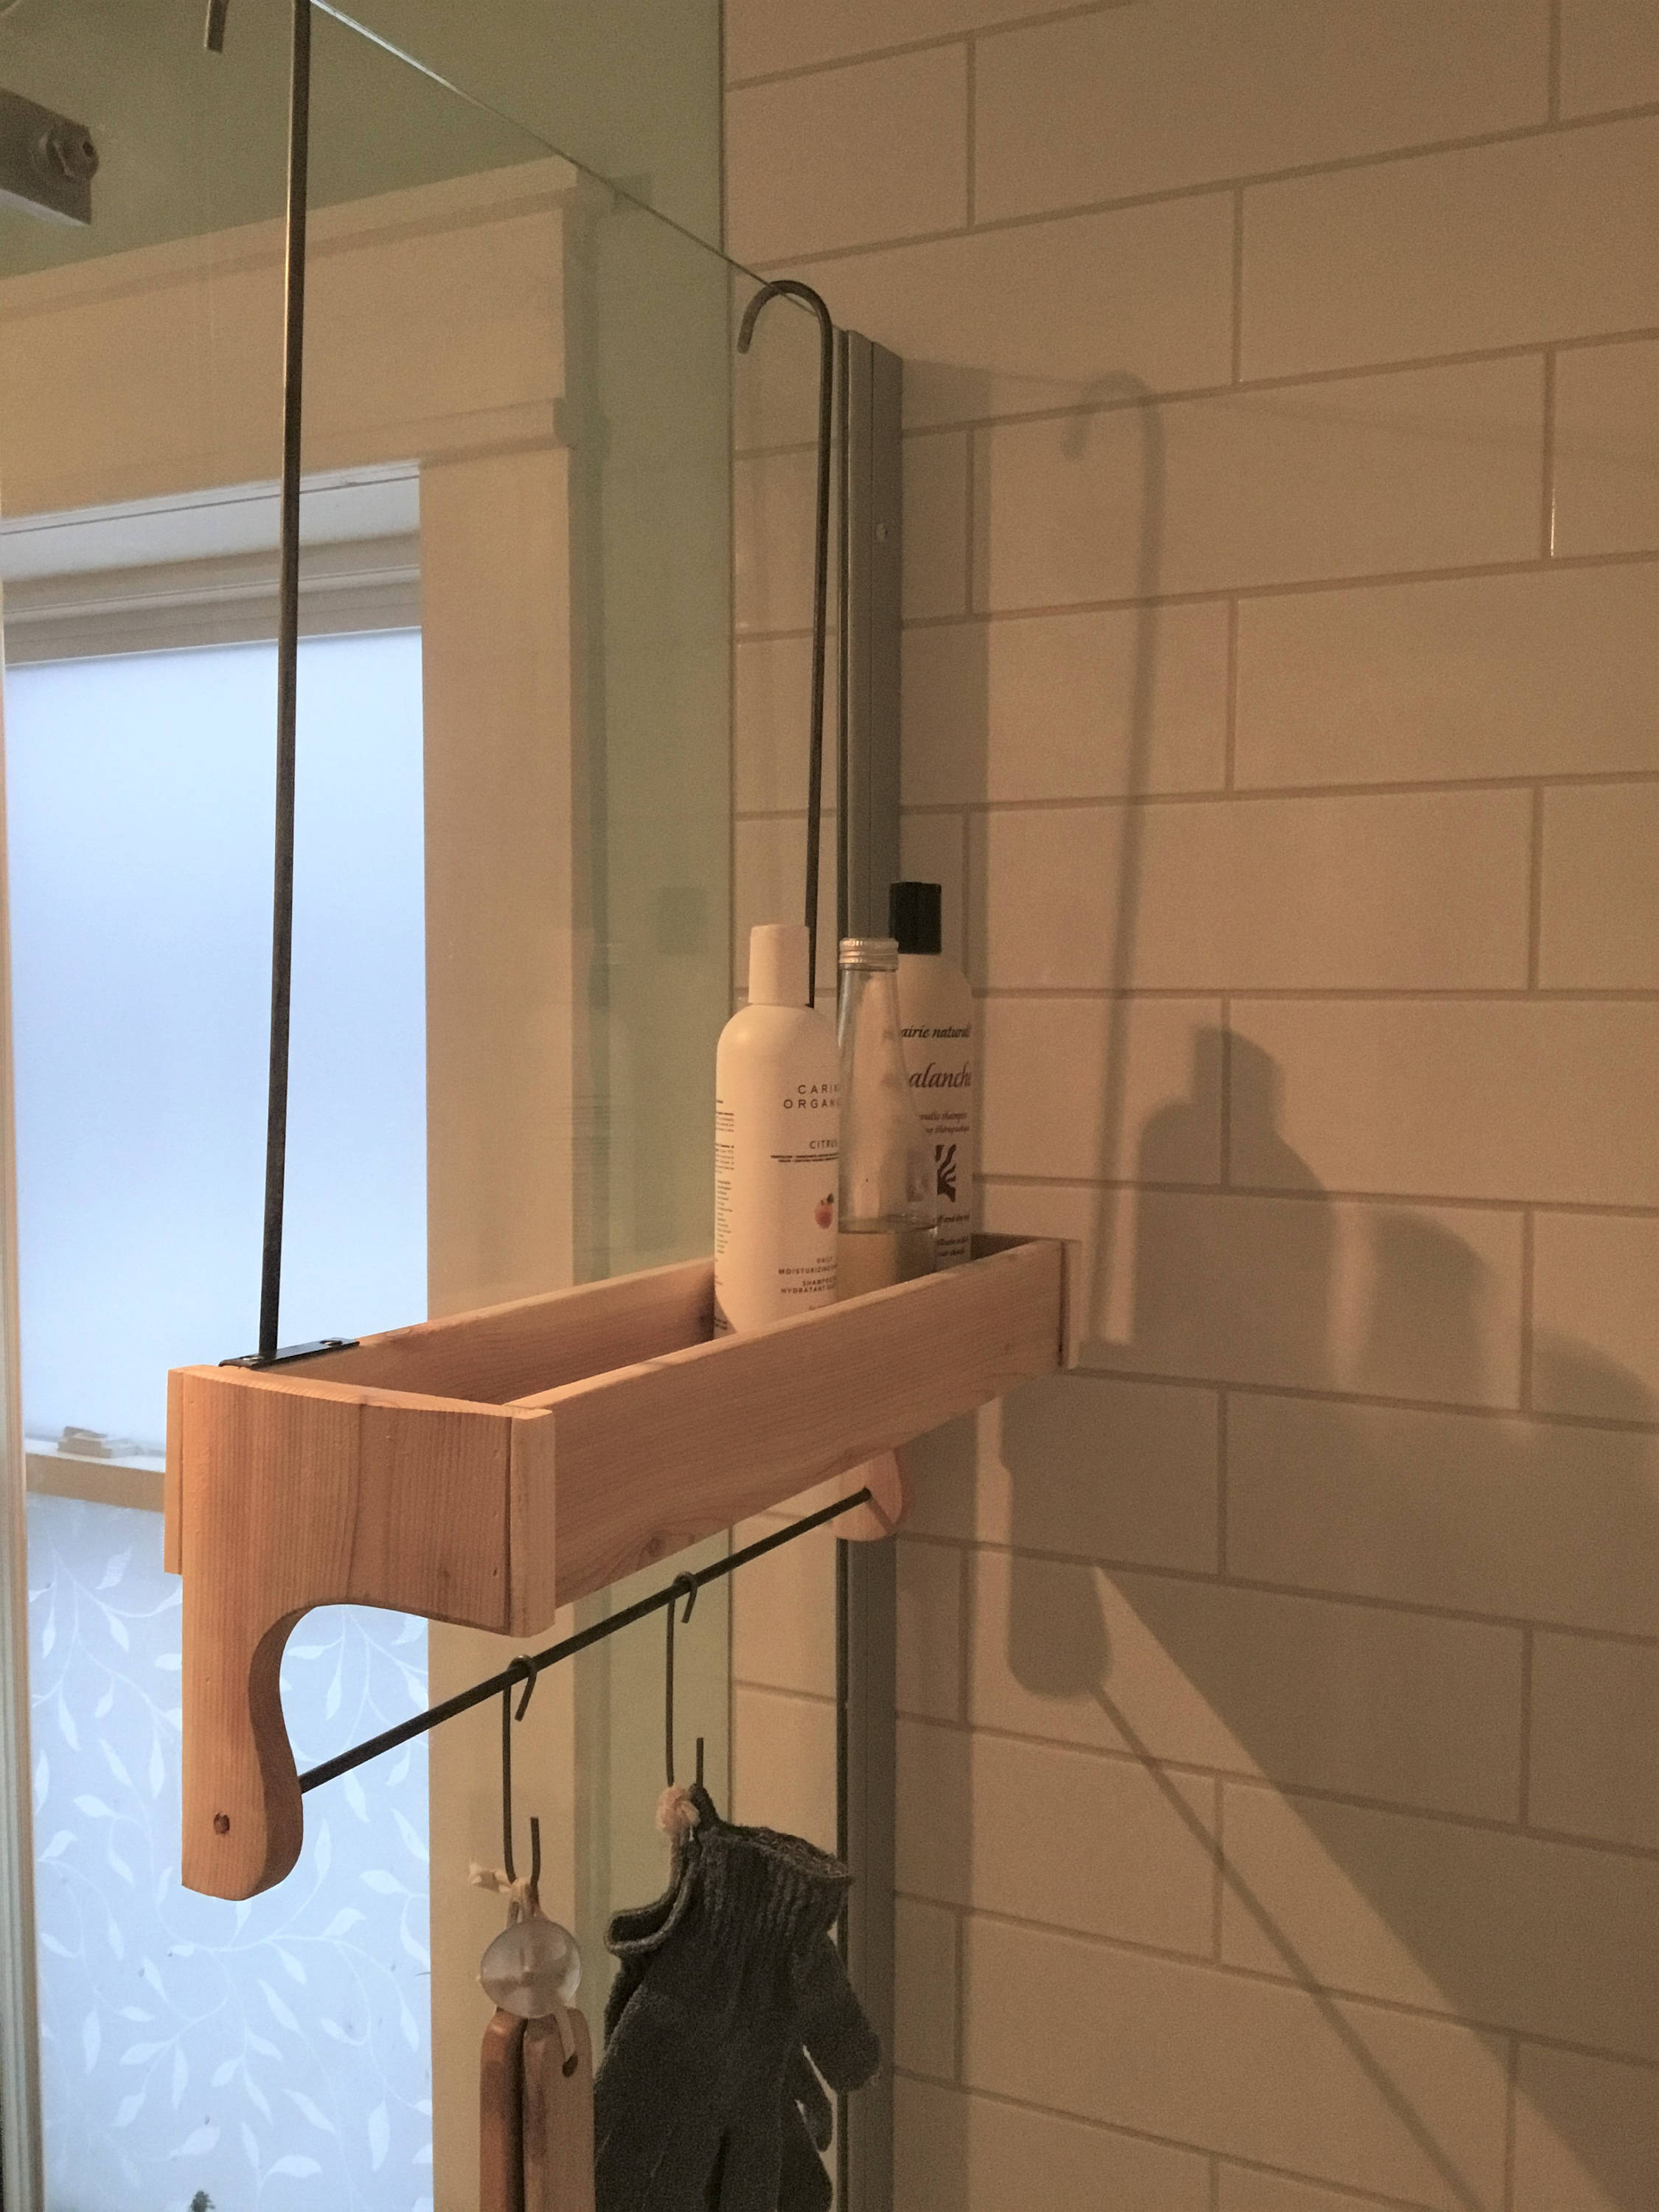 Stained Cedar Wood Shower Caddy Double Shelf with Steel Bar and